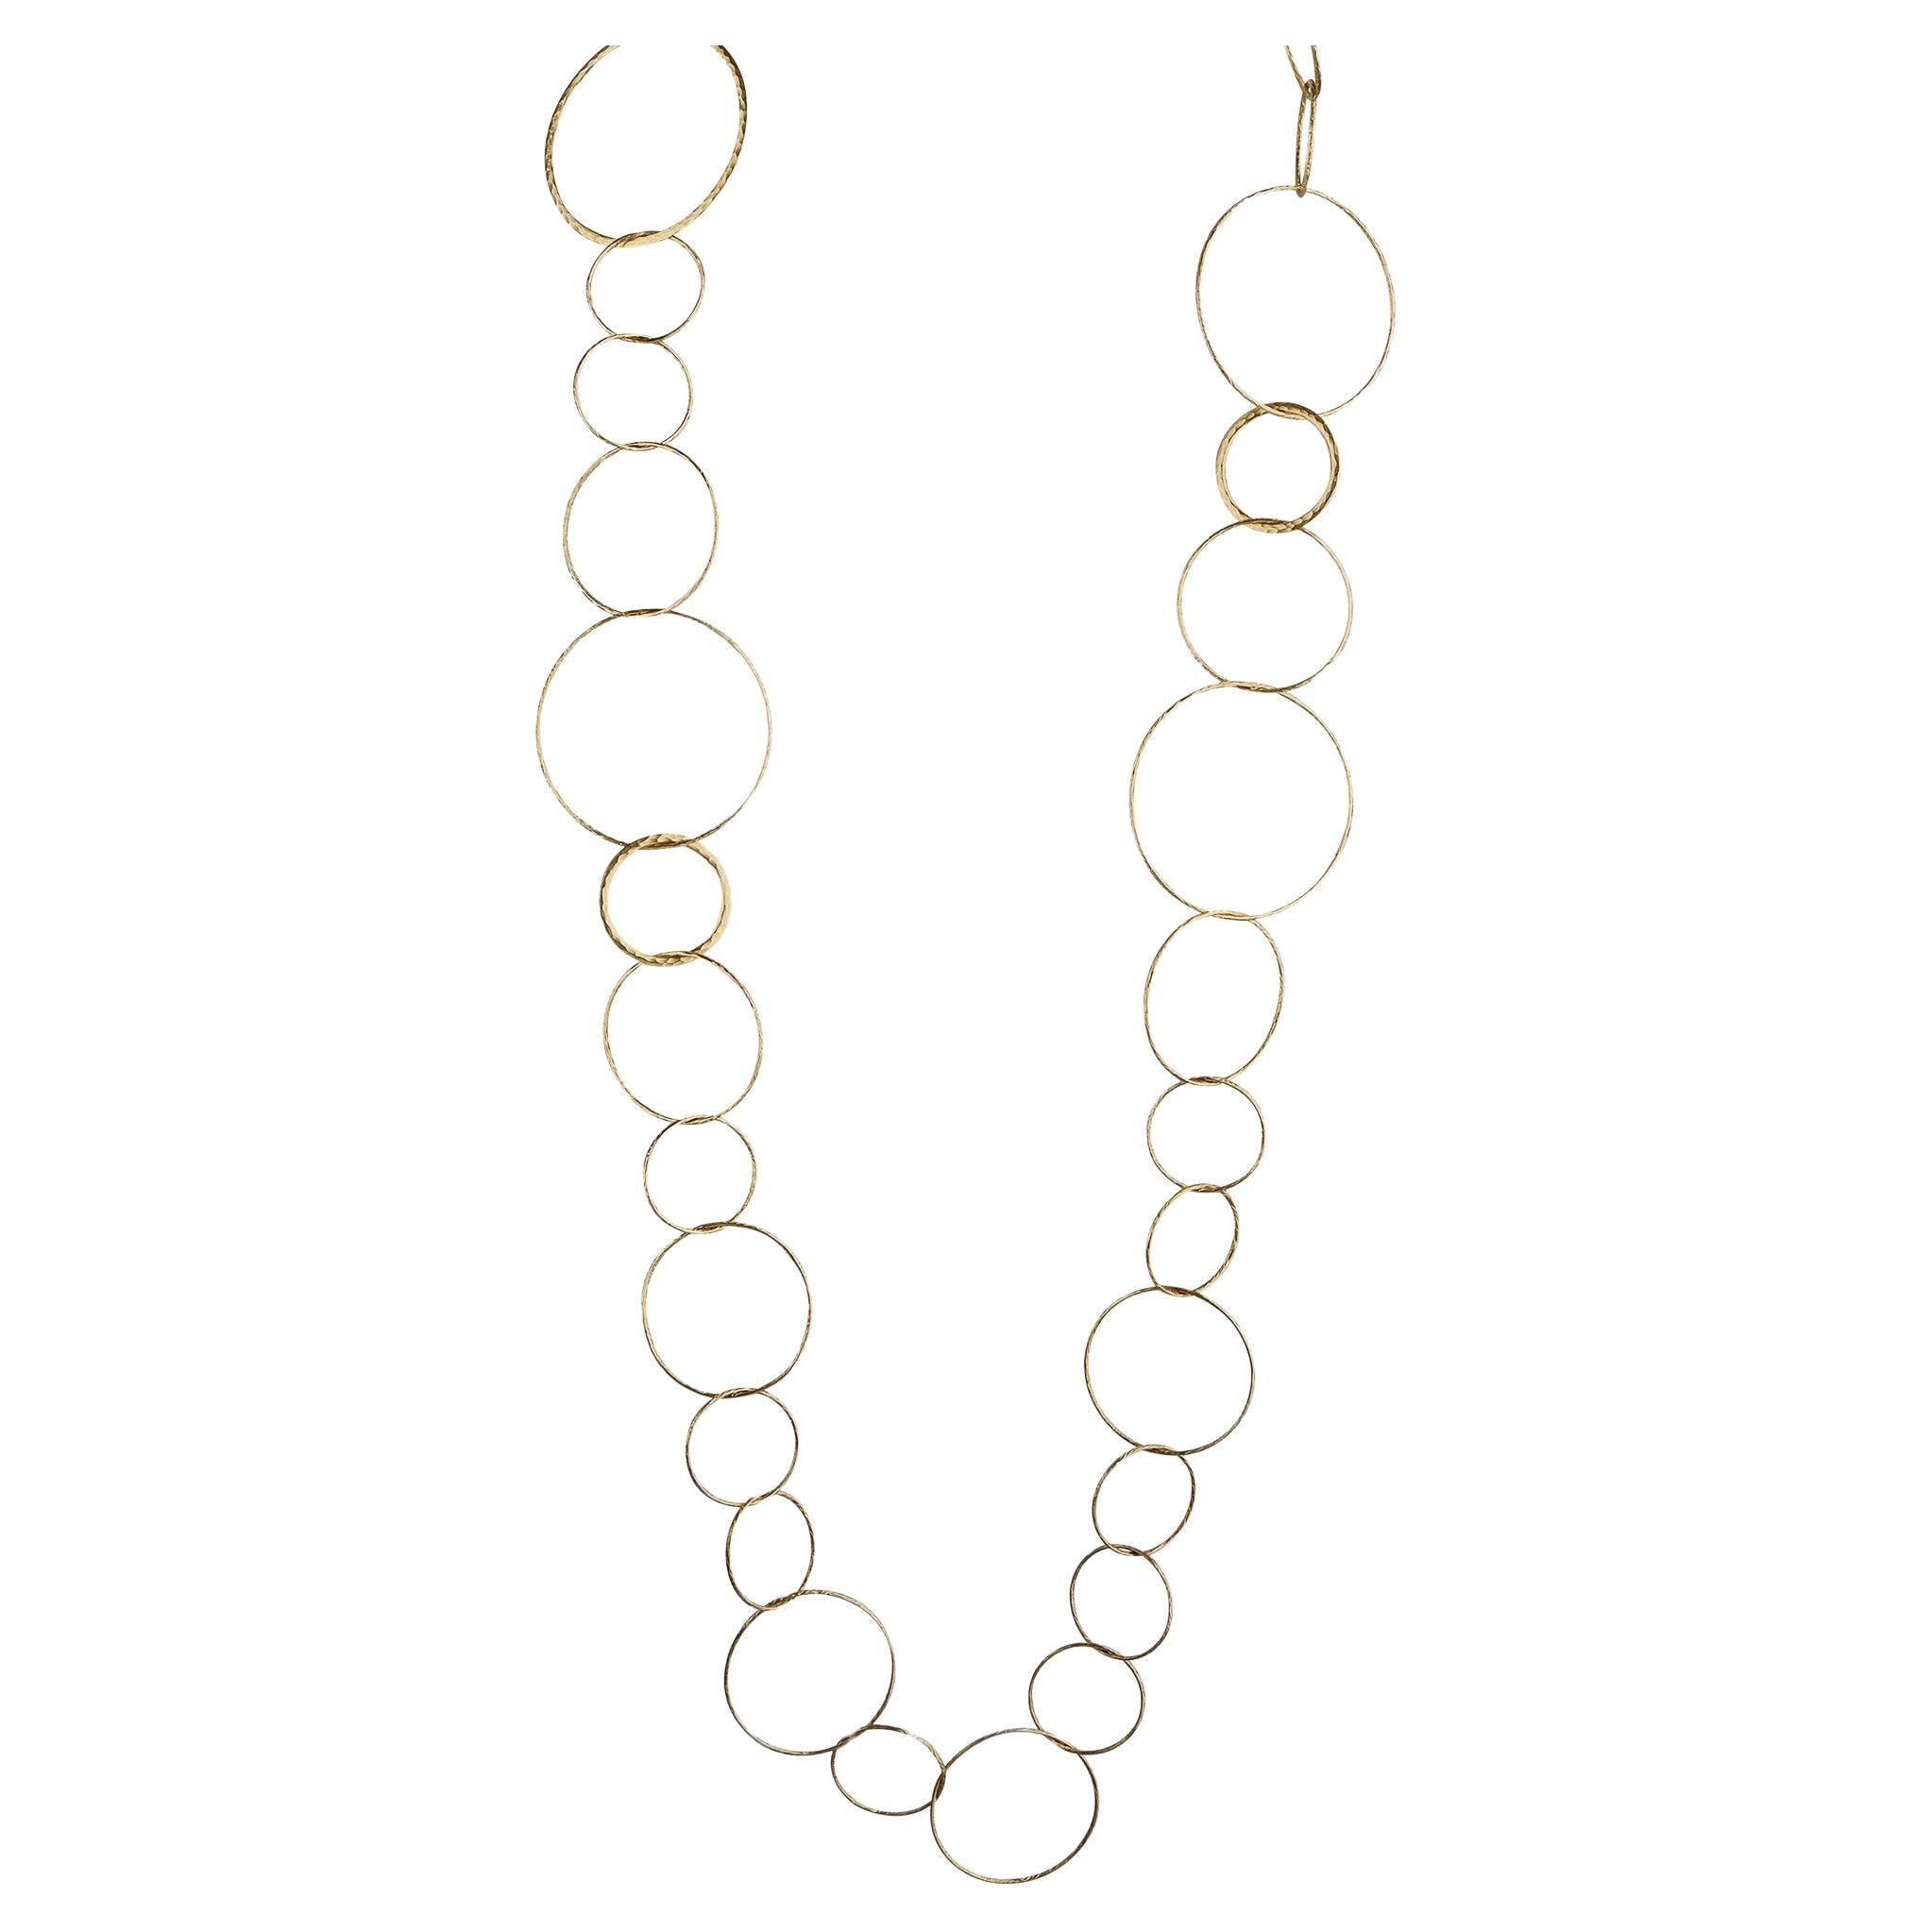 Paloma Picasso for Tiffany & Co. 18K Gold gehämmerte "Circles" Halskette